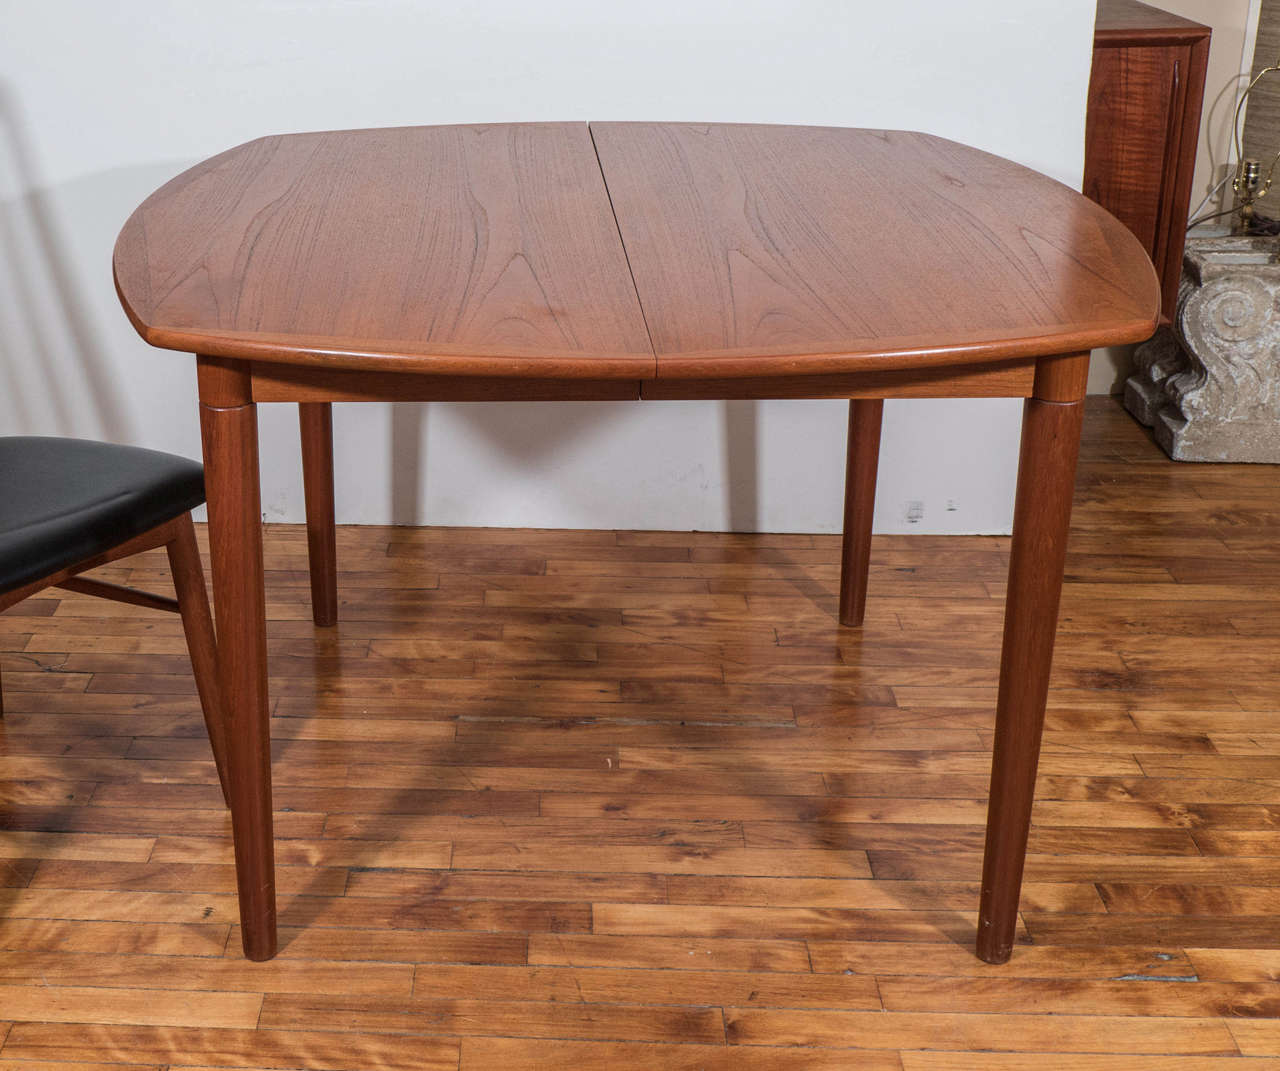 A Danish modern Koefoeds Hornslet teak extension dining table with two leaves  The two 18